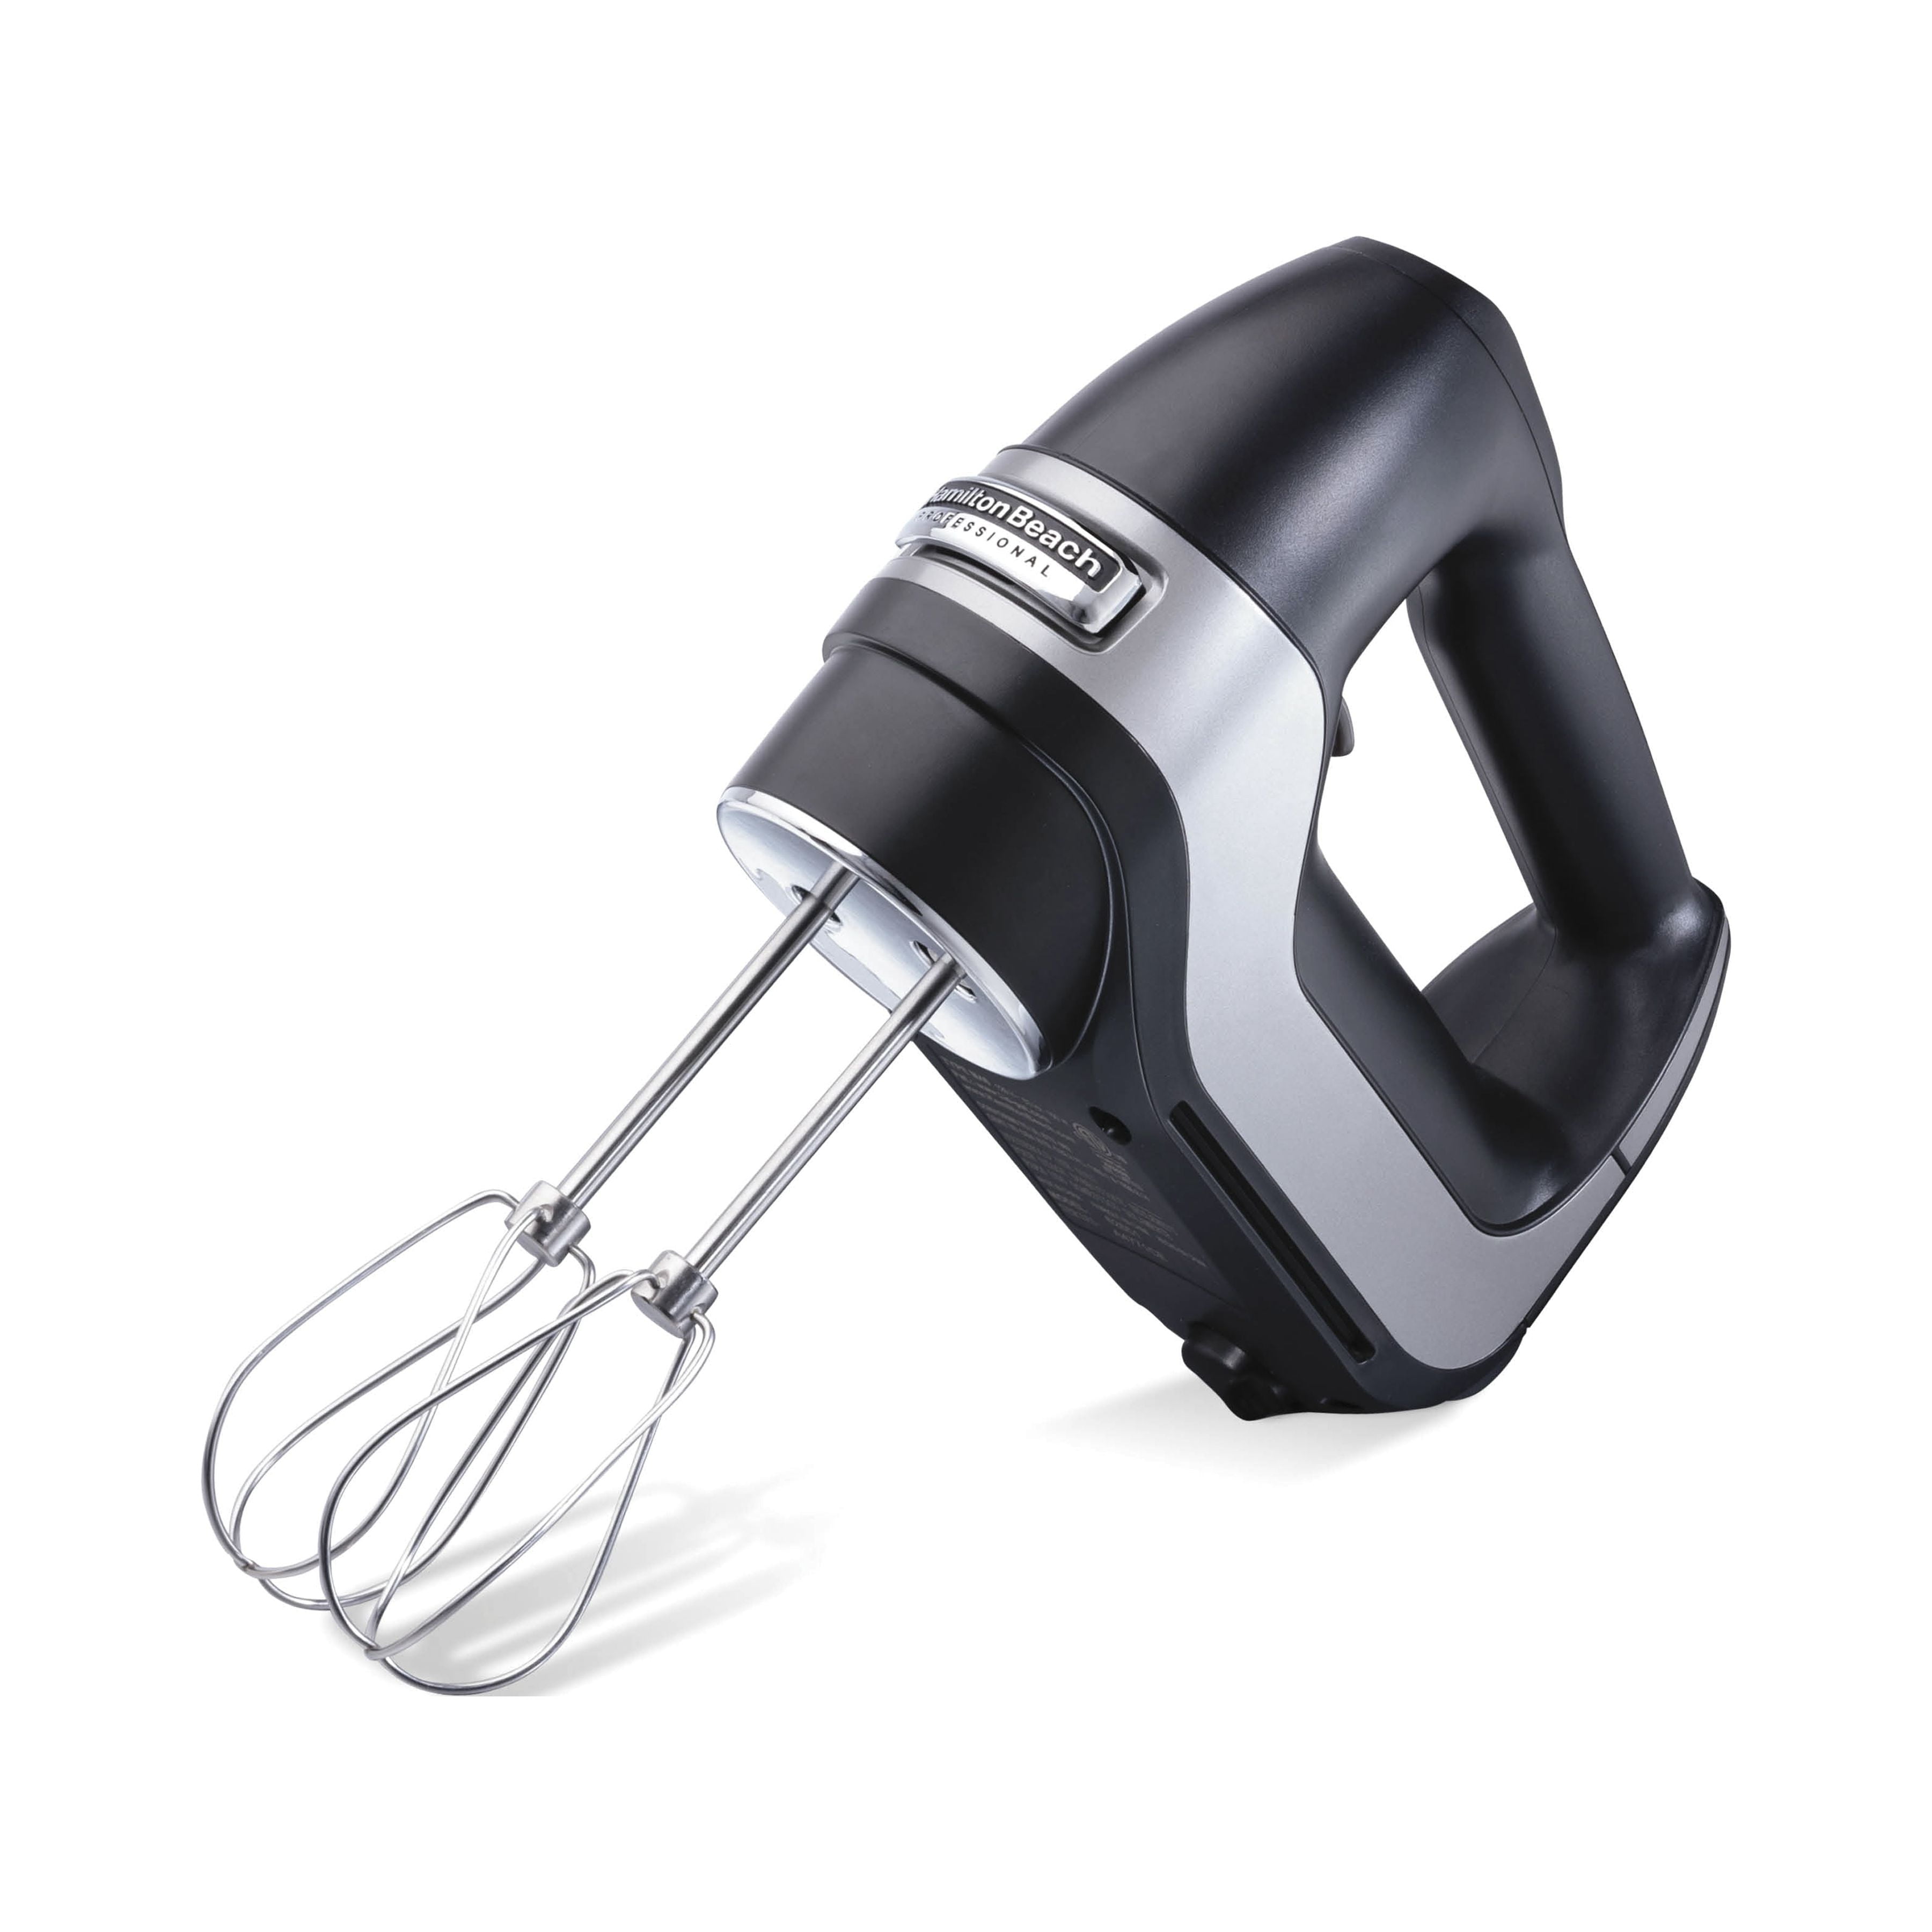  Hamilton Beach Professional 5-Speed Electric Hand Mixer with  Snap-On Storage Case, QuickBurst, Stainless Steel Twisted Wire Beaters and  Whisk, Mint (62658): Home & Kitchen